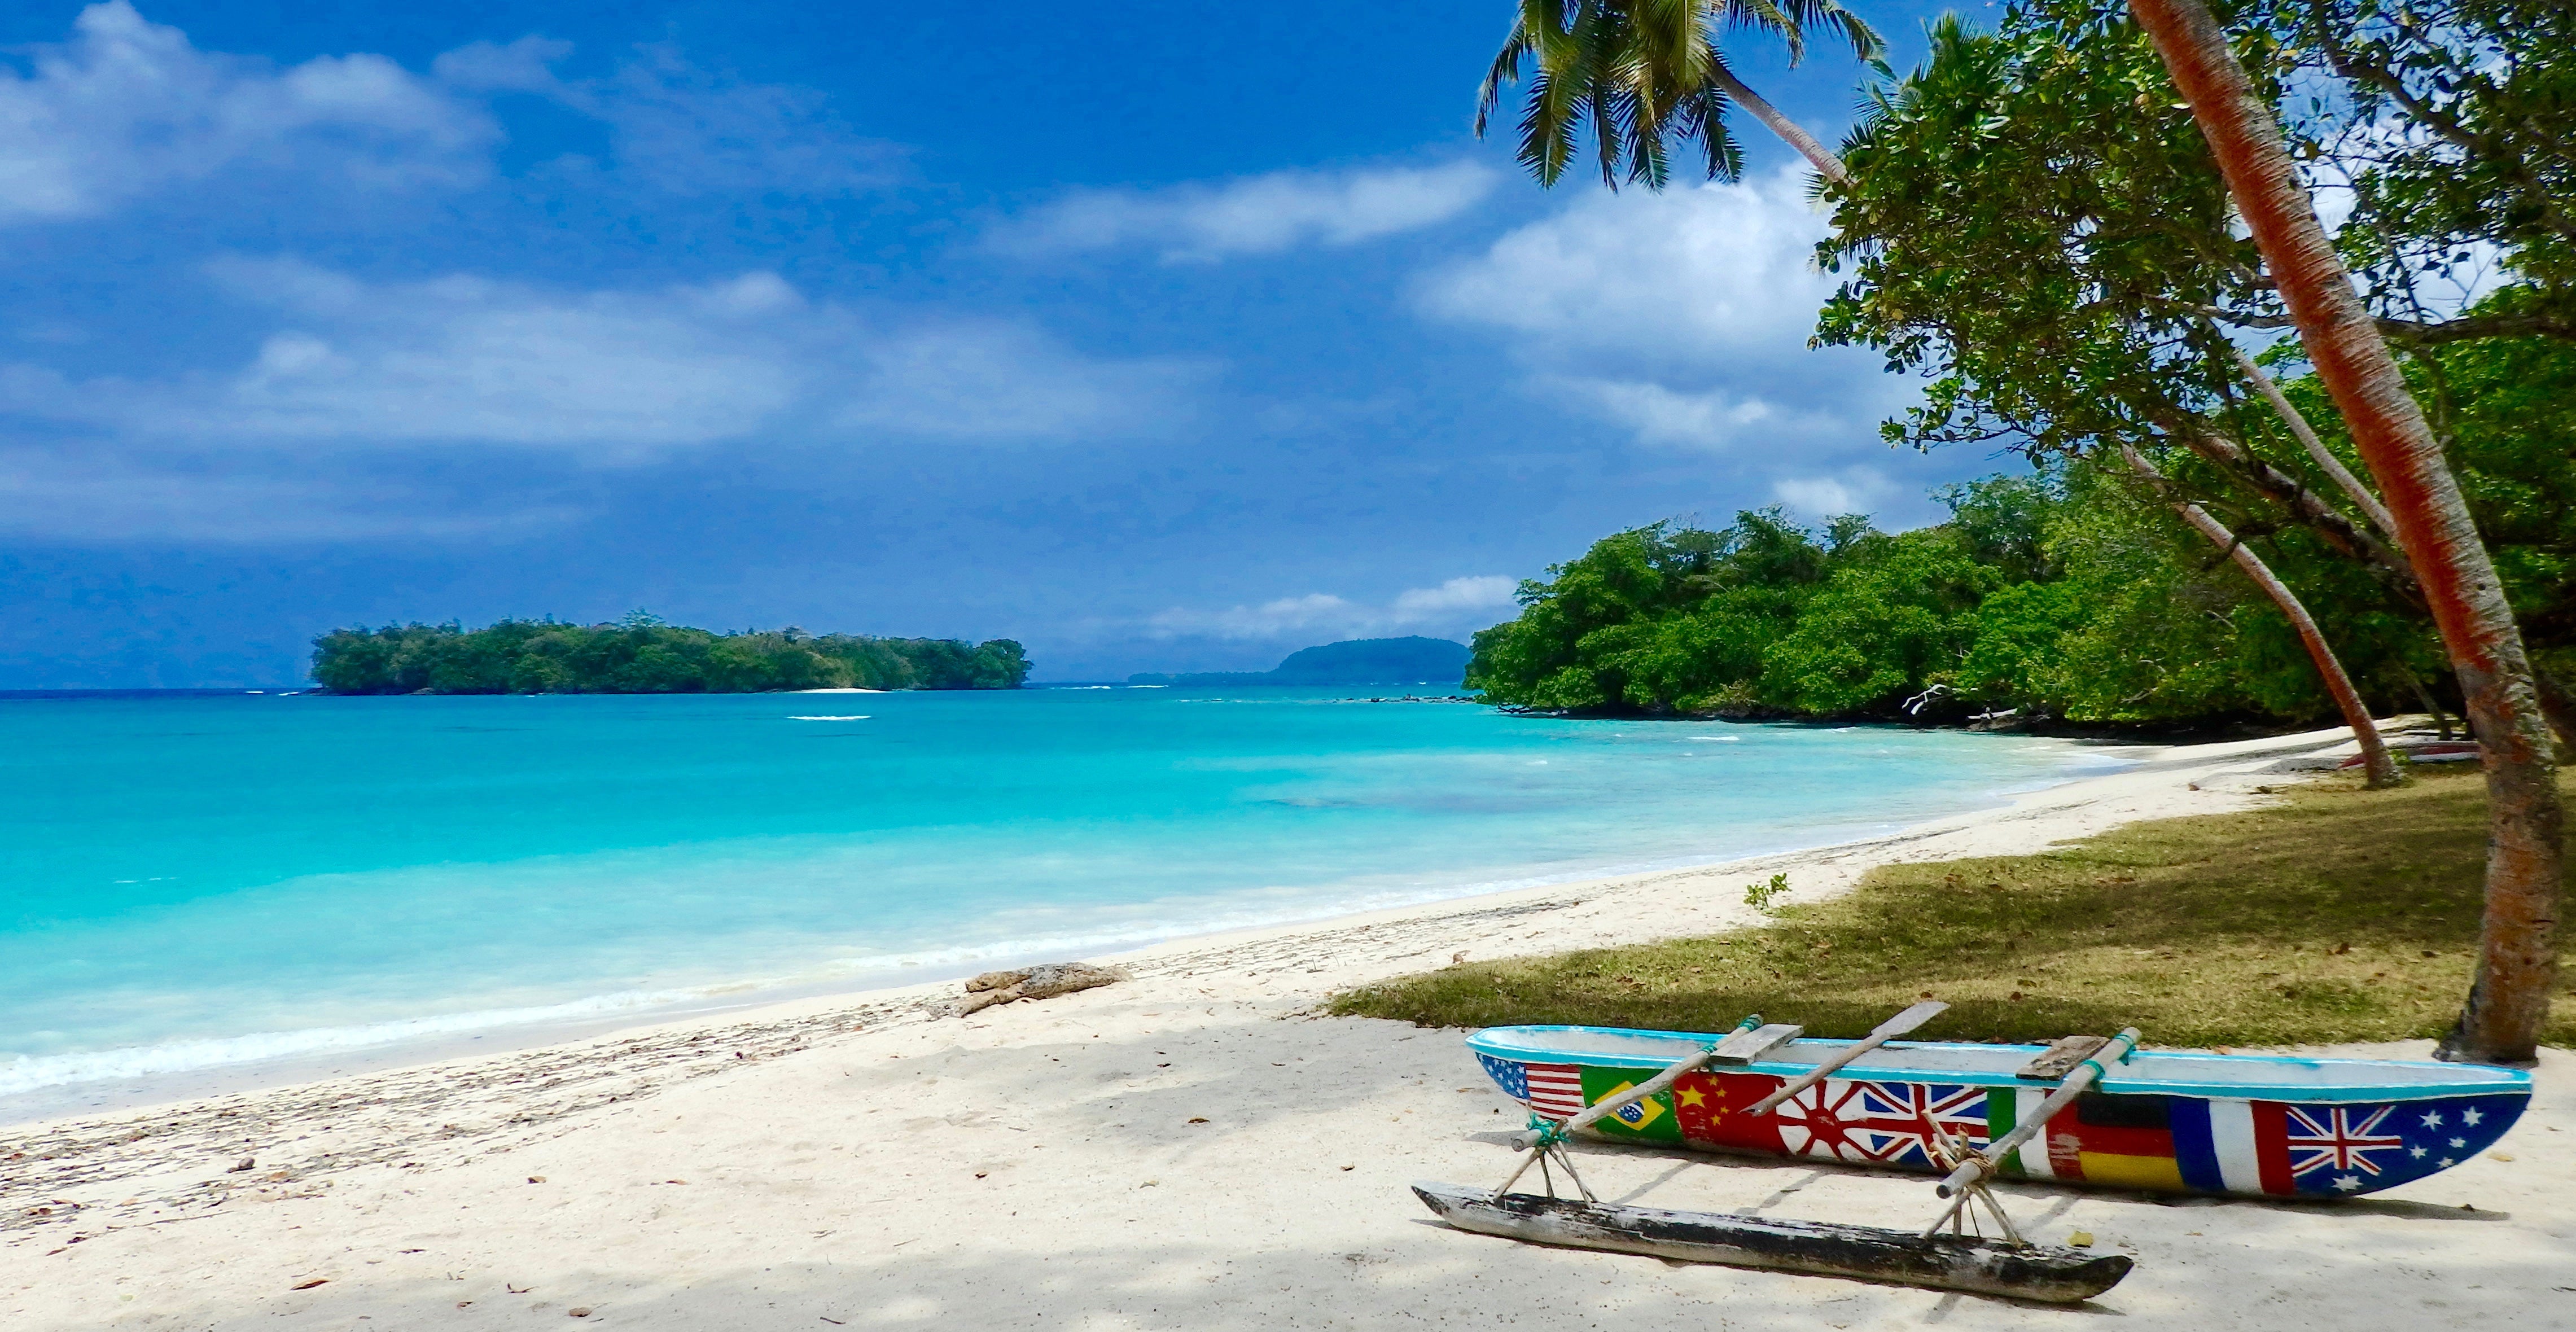 Champagne Beach is one of the most known in Vanuatu for the white sand and an incredible clear water